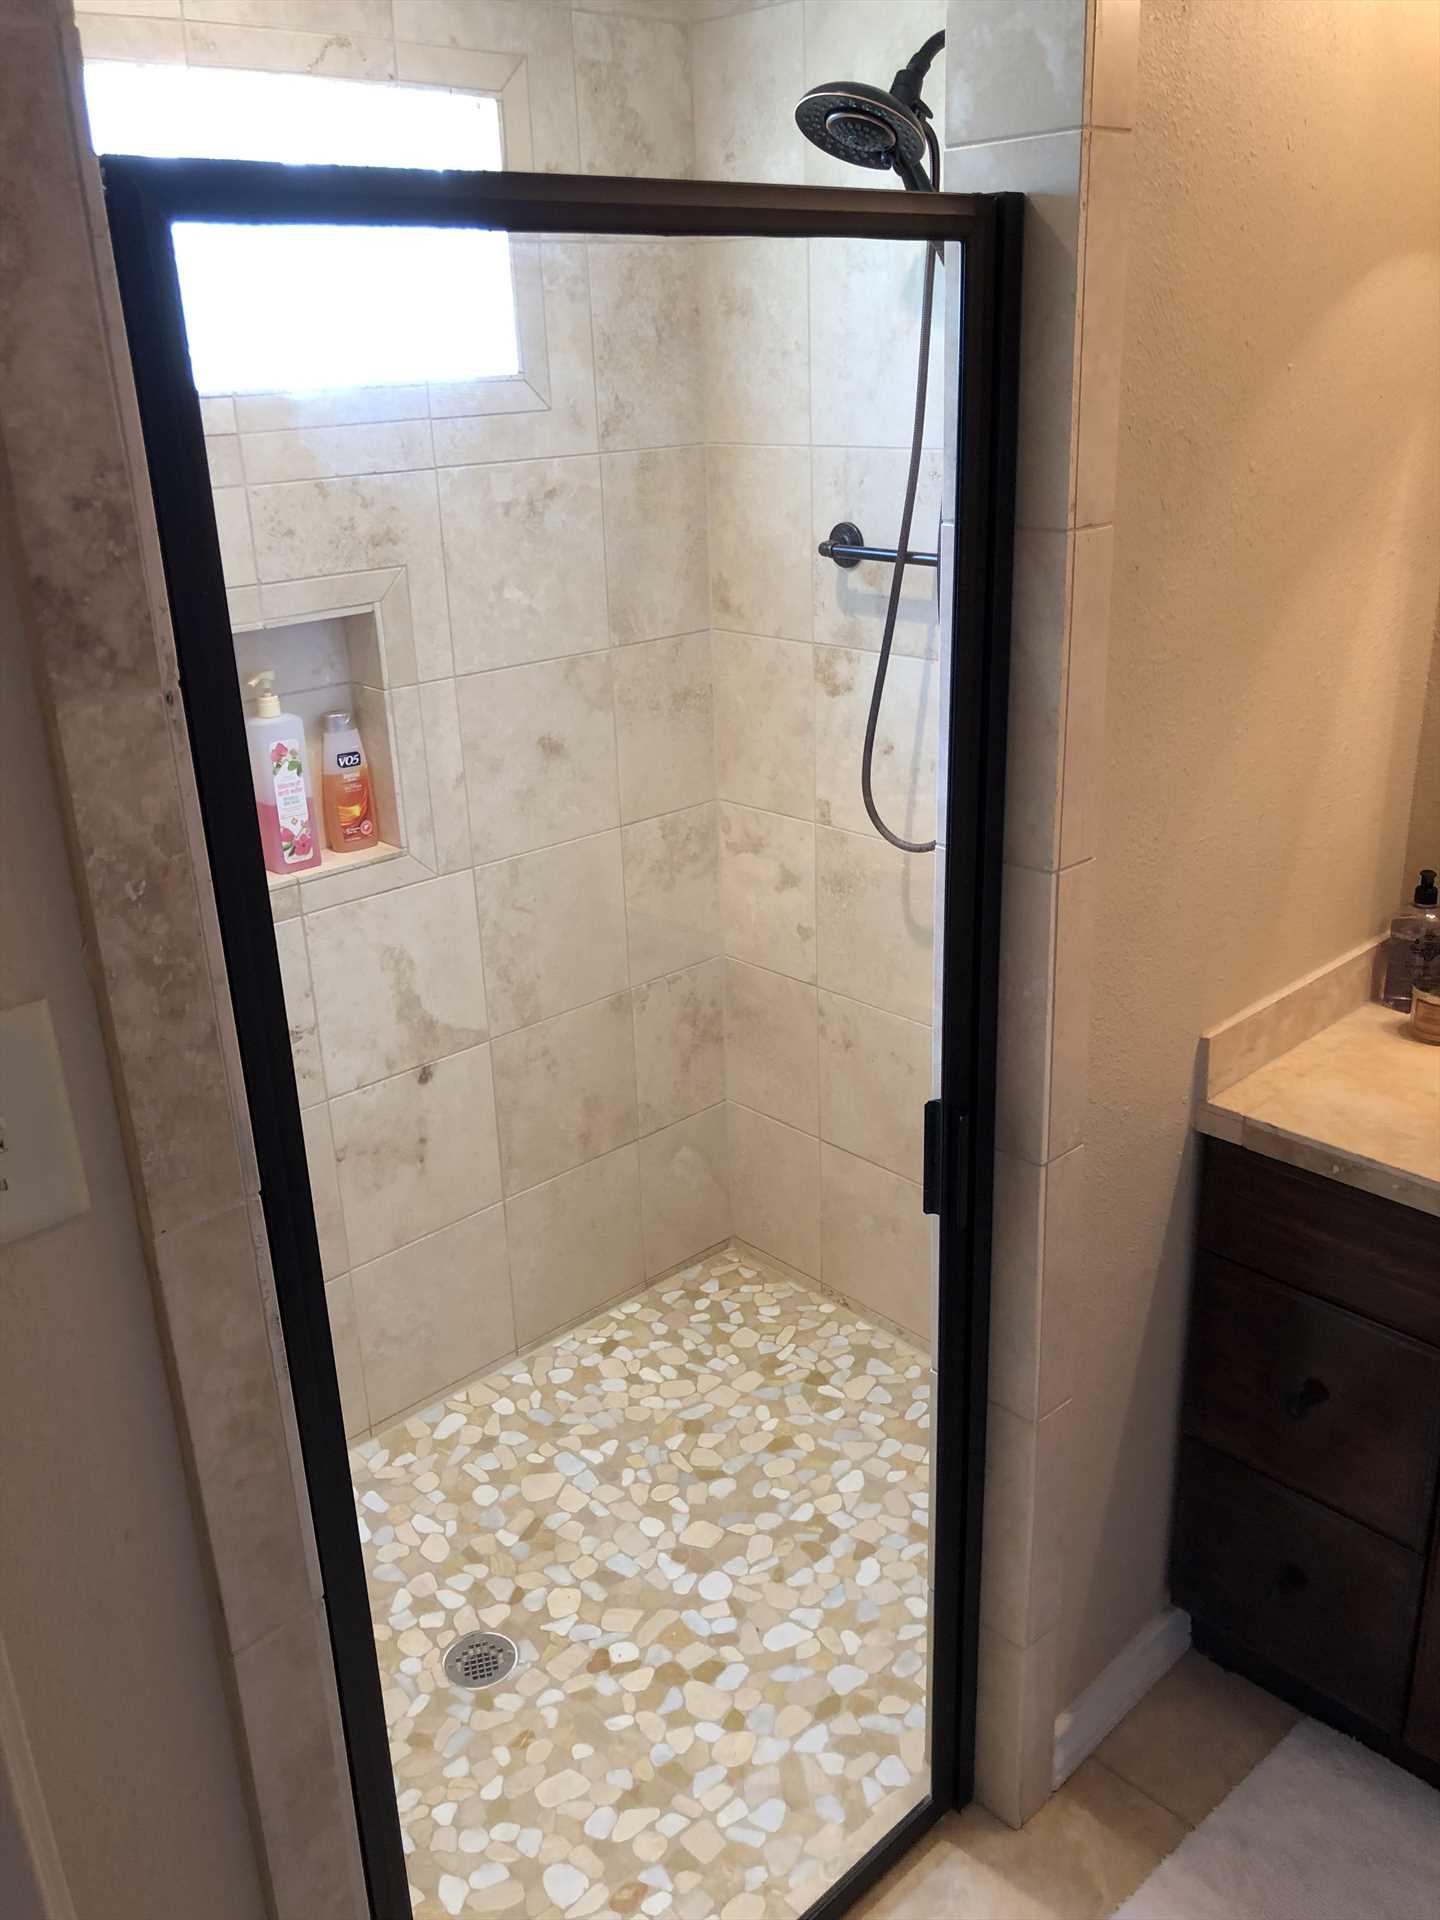                                                 Check out this roomy shower stall in the master bath! Both bathrooms, and all the beds, are furnished with clean linens and towels.